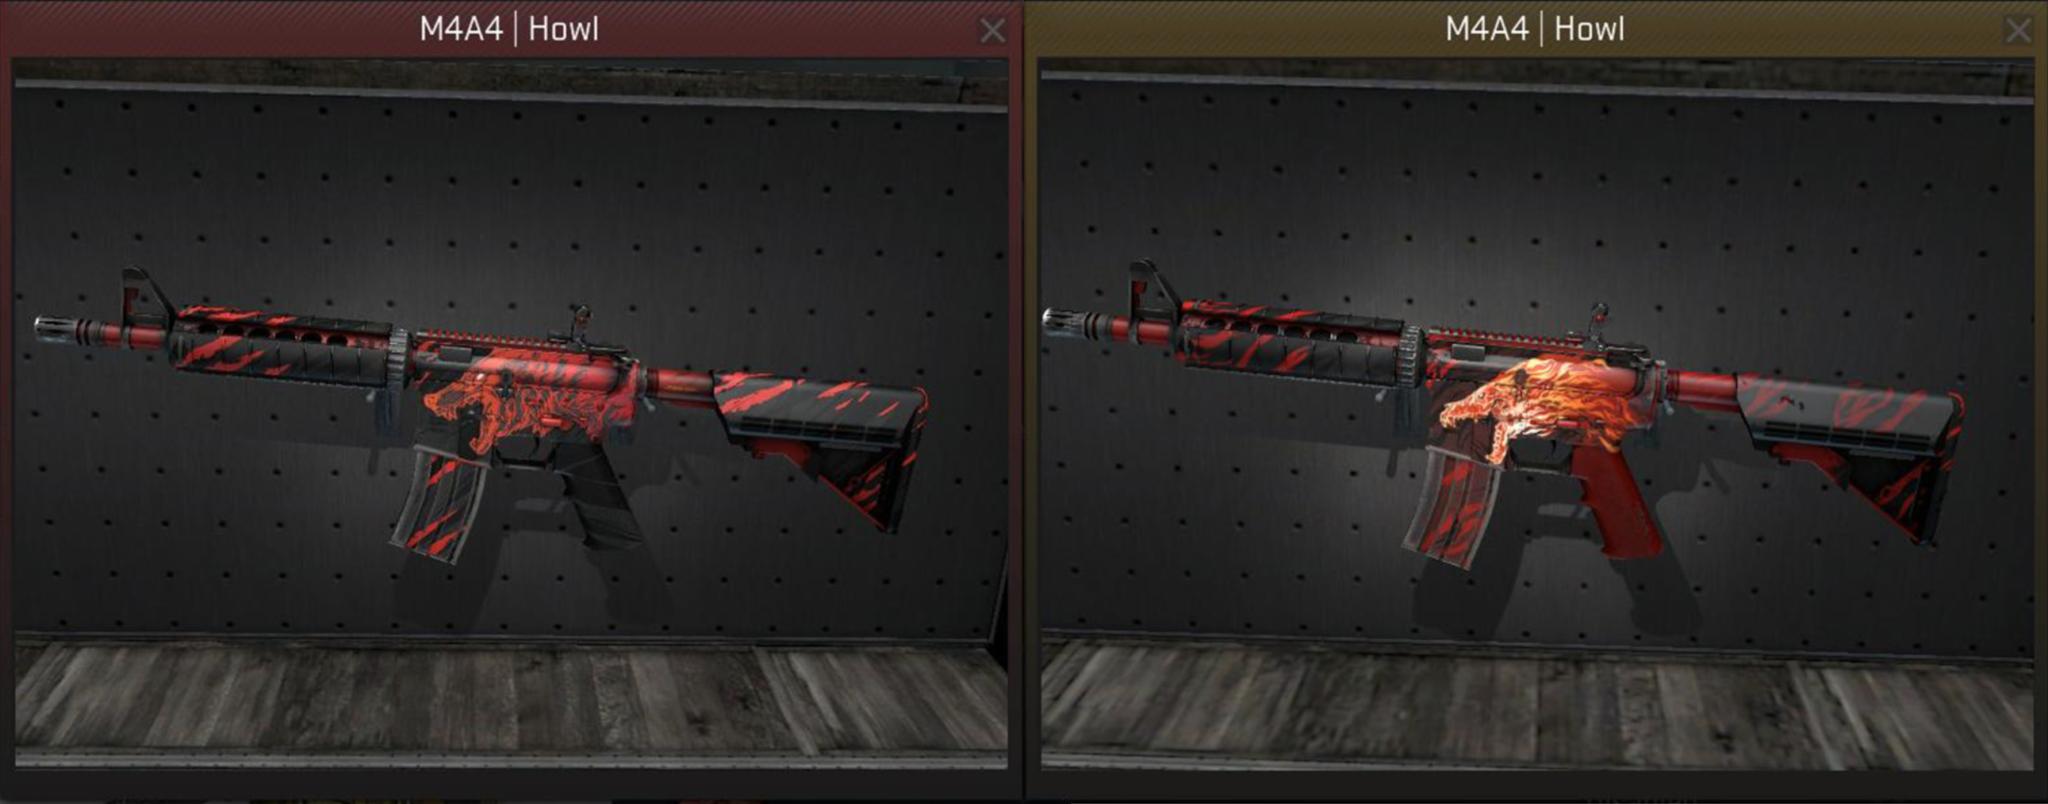 M4A4 Howling Dawn and Howl.